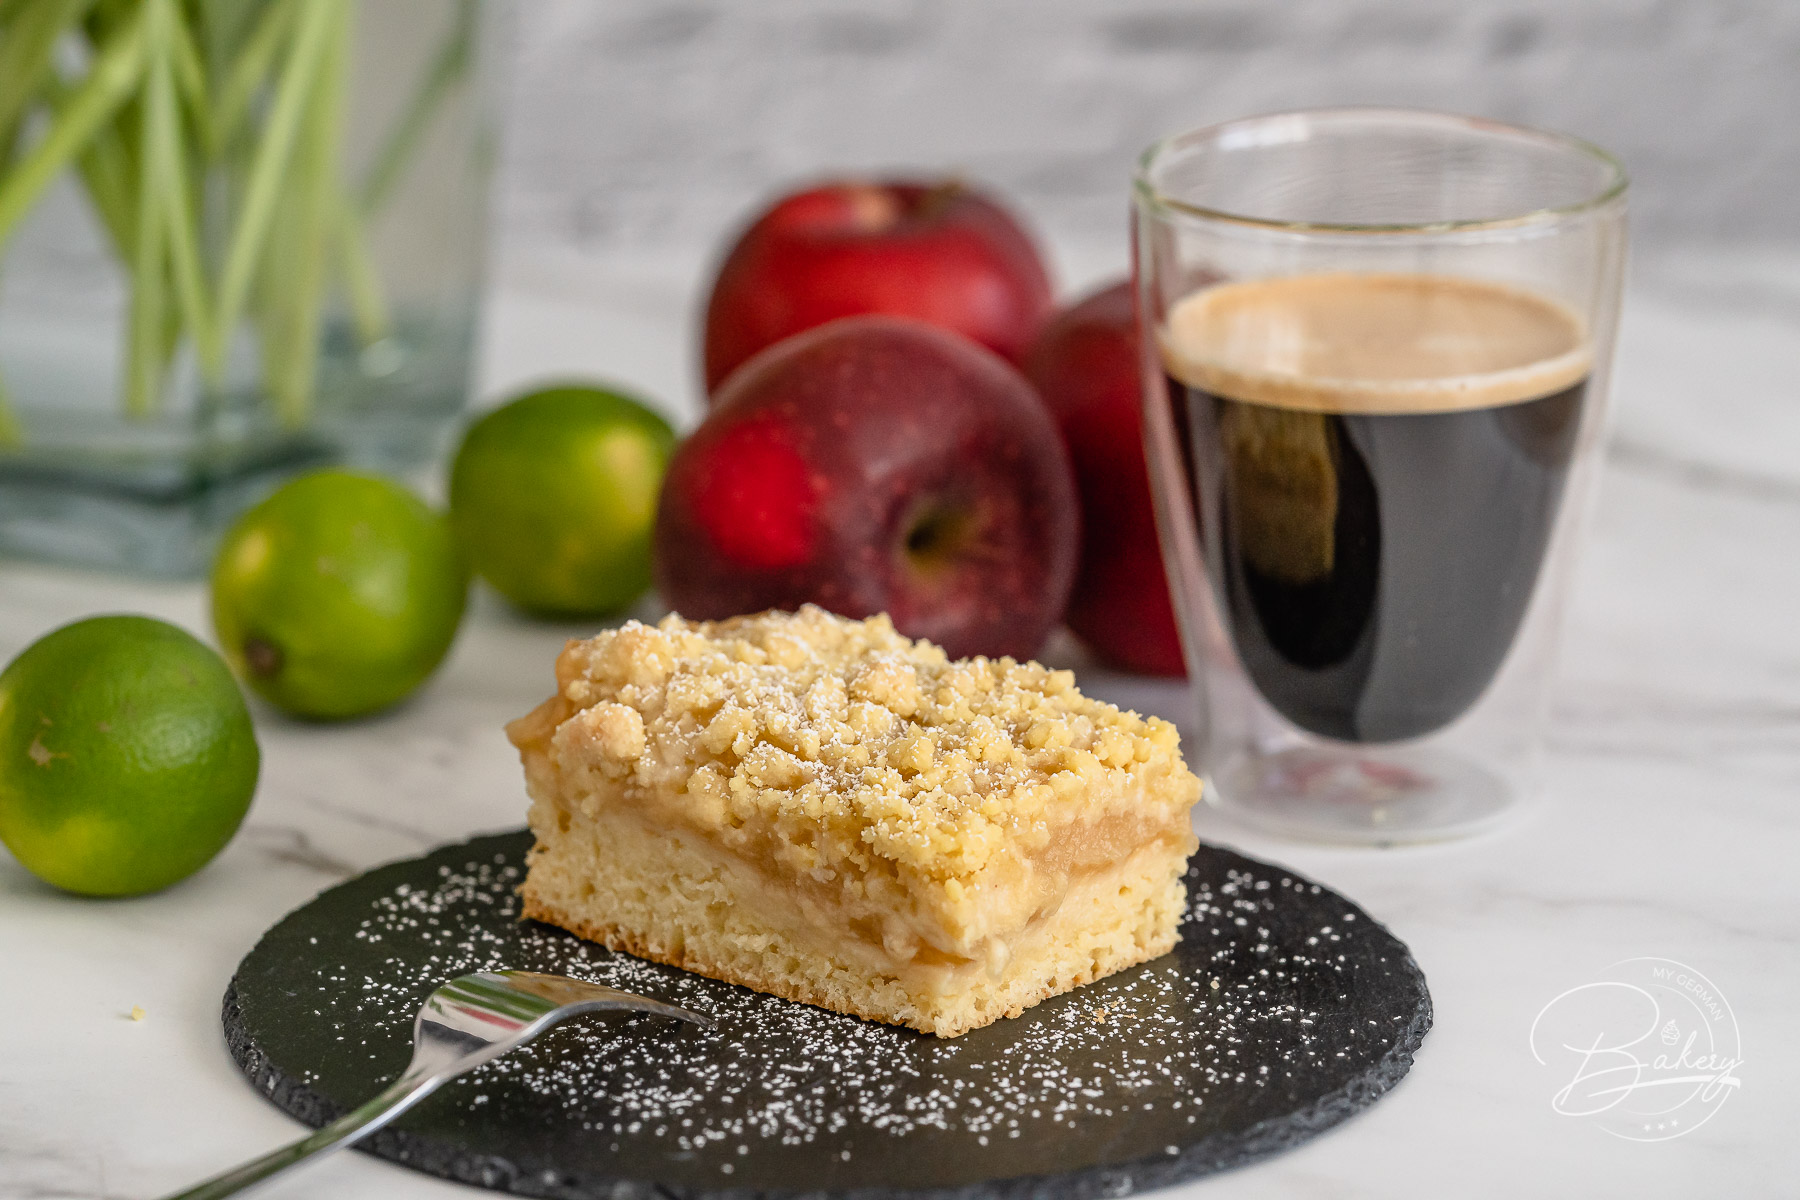 Apple crumble cake recipe - yeast cake delicious and easy - Delicious apple crumble cake recipe for yeast cake and crumble cake. Cake with butter crumbles and applesauce - quick easy instructions - delicious yeast cake - recipe sheet cake - easy cake with dry yeast.